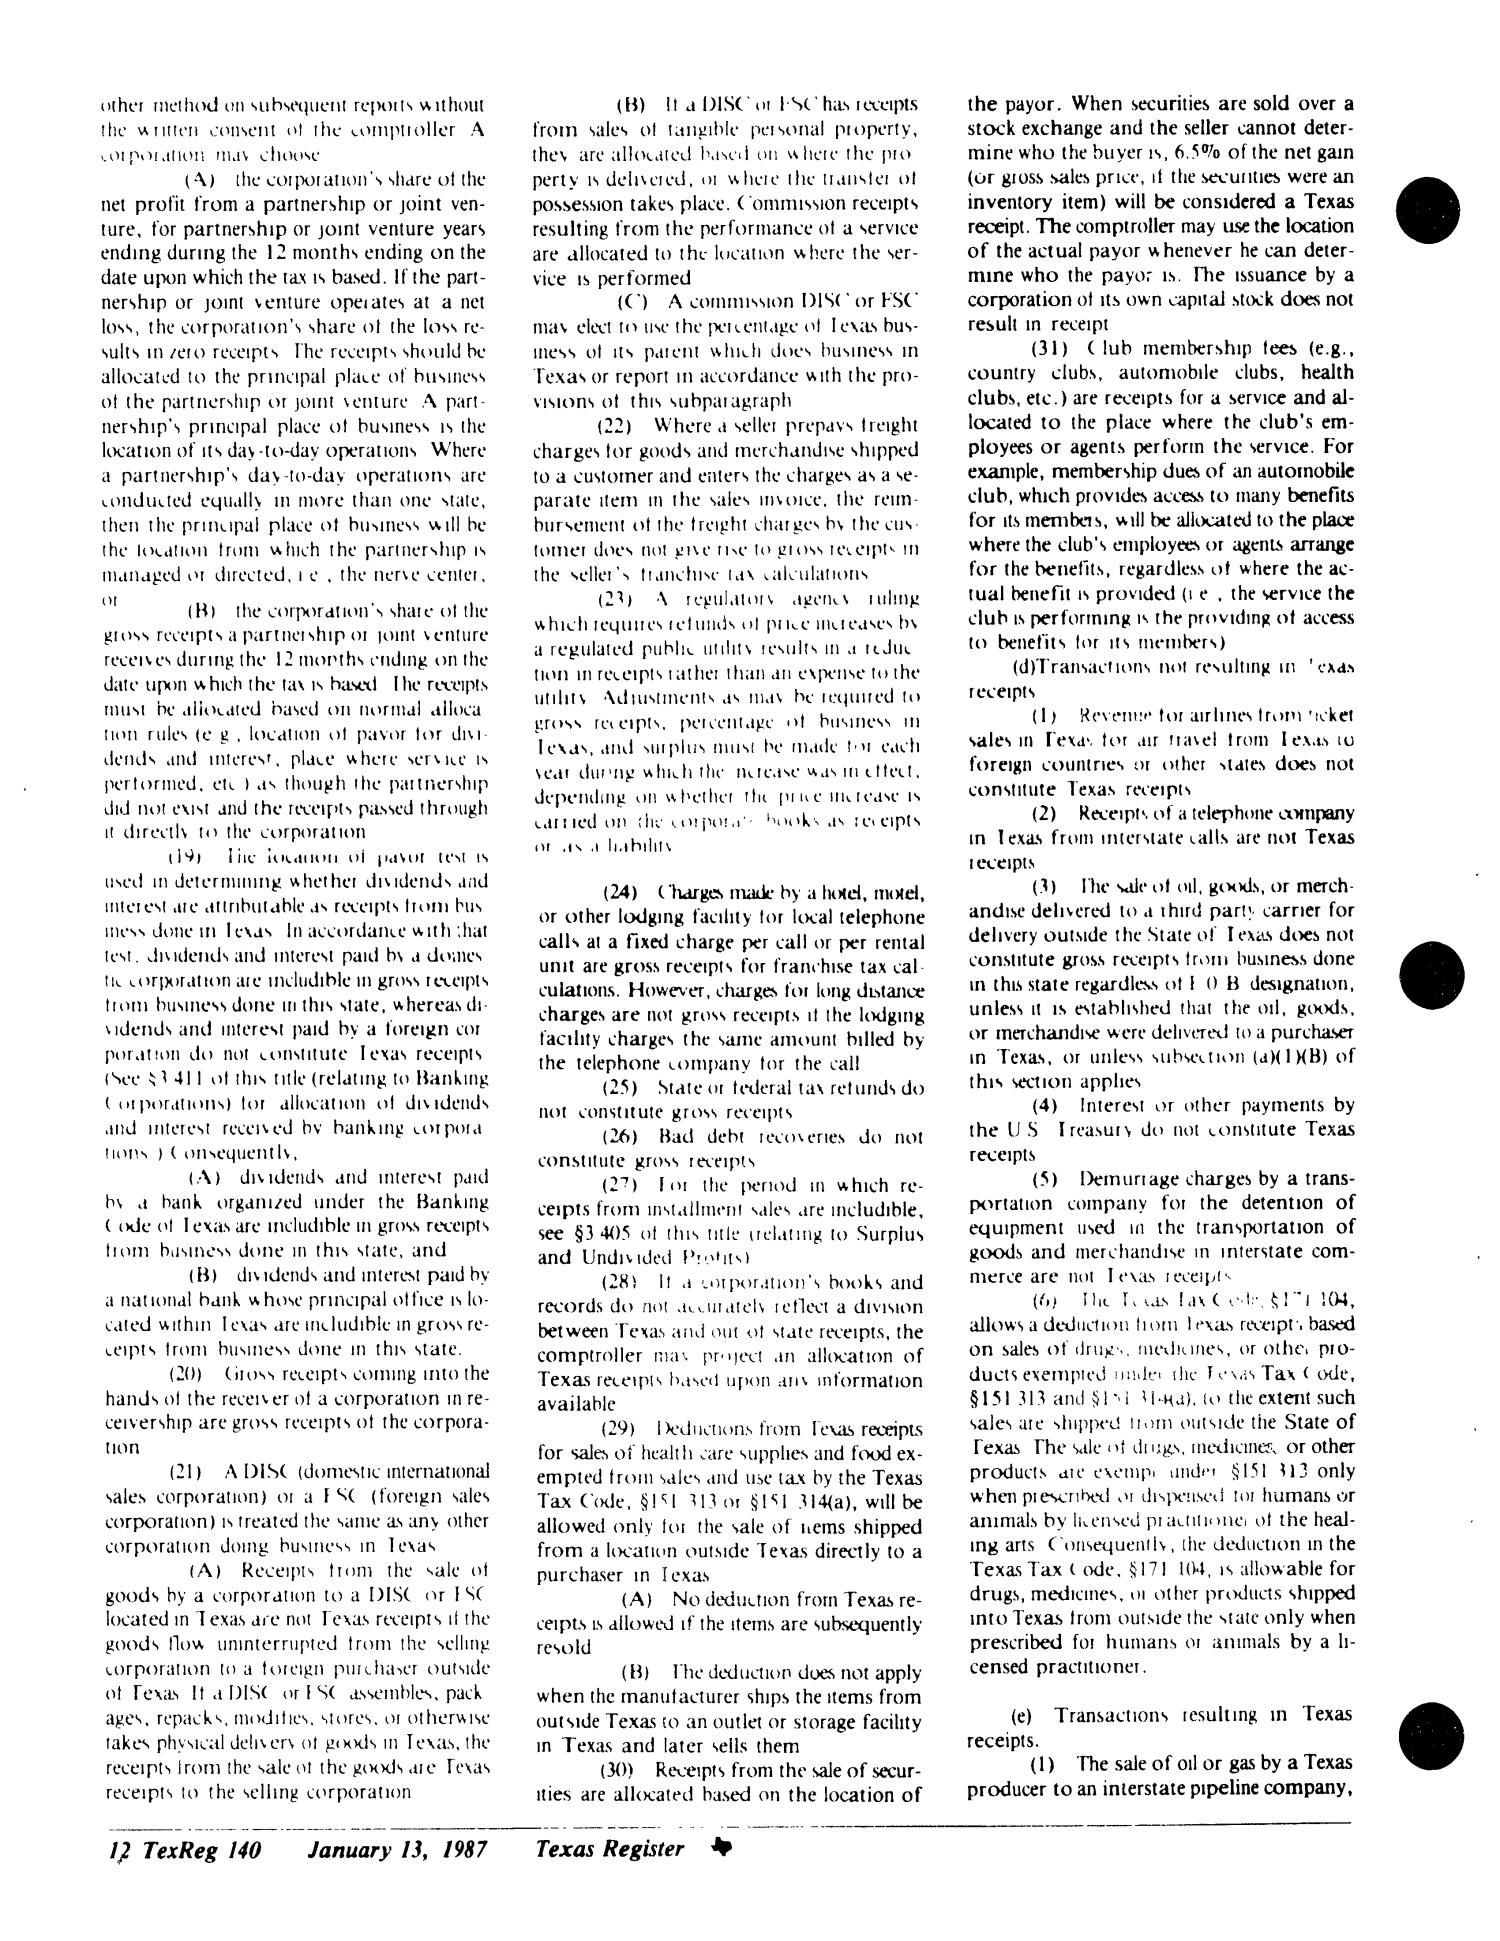 Texas Register, Volume 12, Number 3, Pages 89-157, January 13, 1987
                                                
                                                    140
                                                